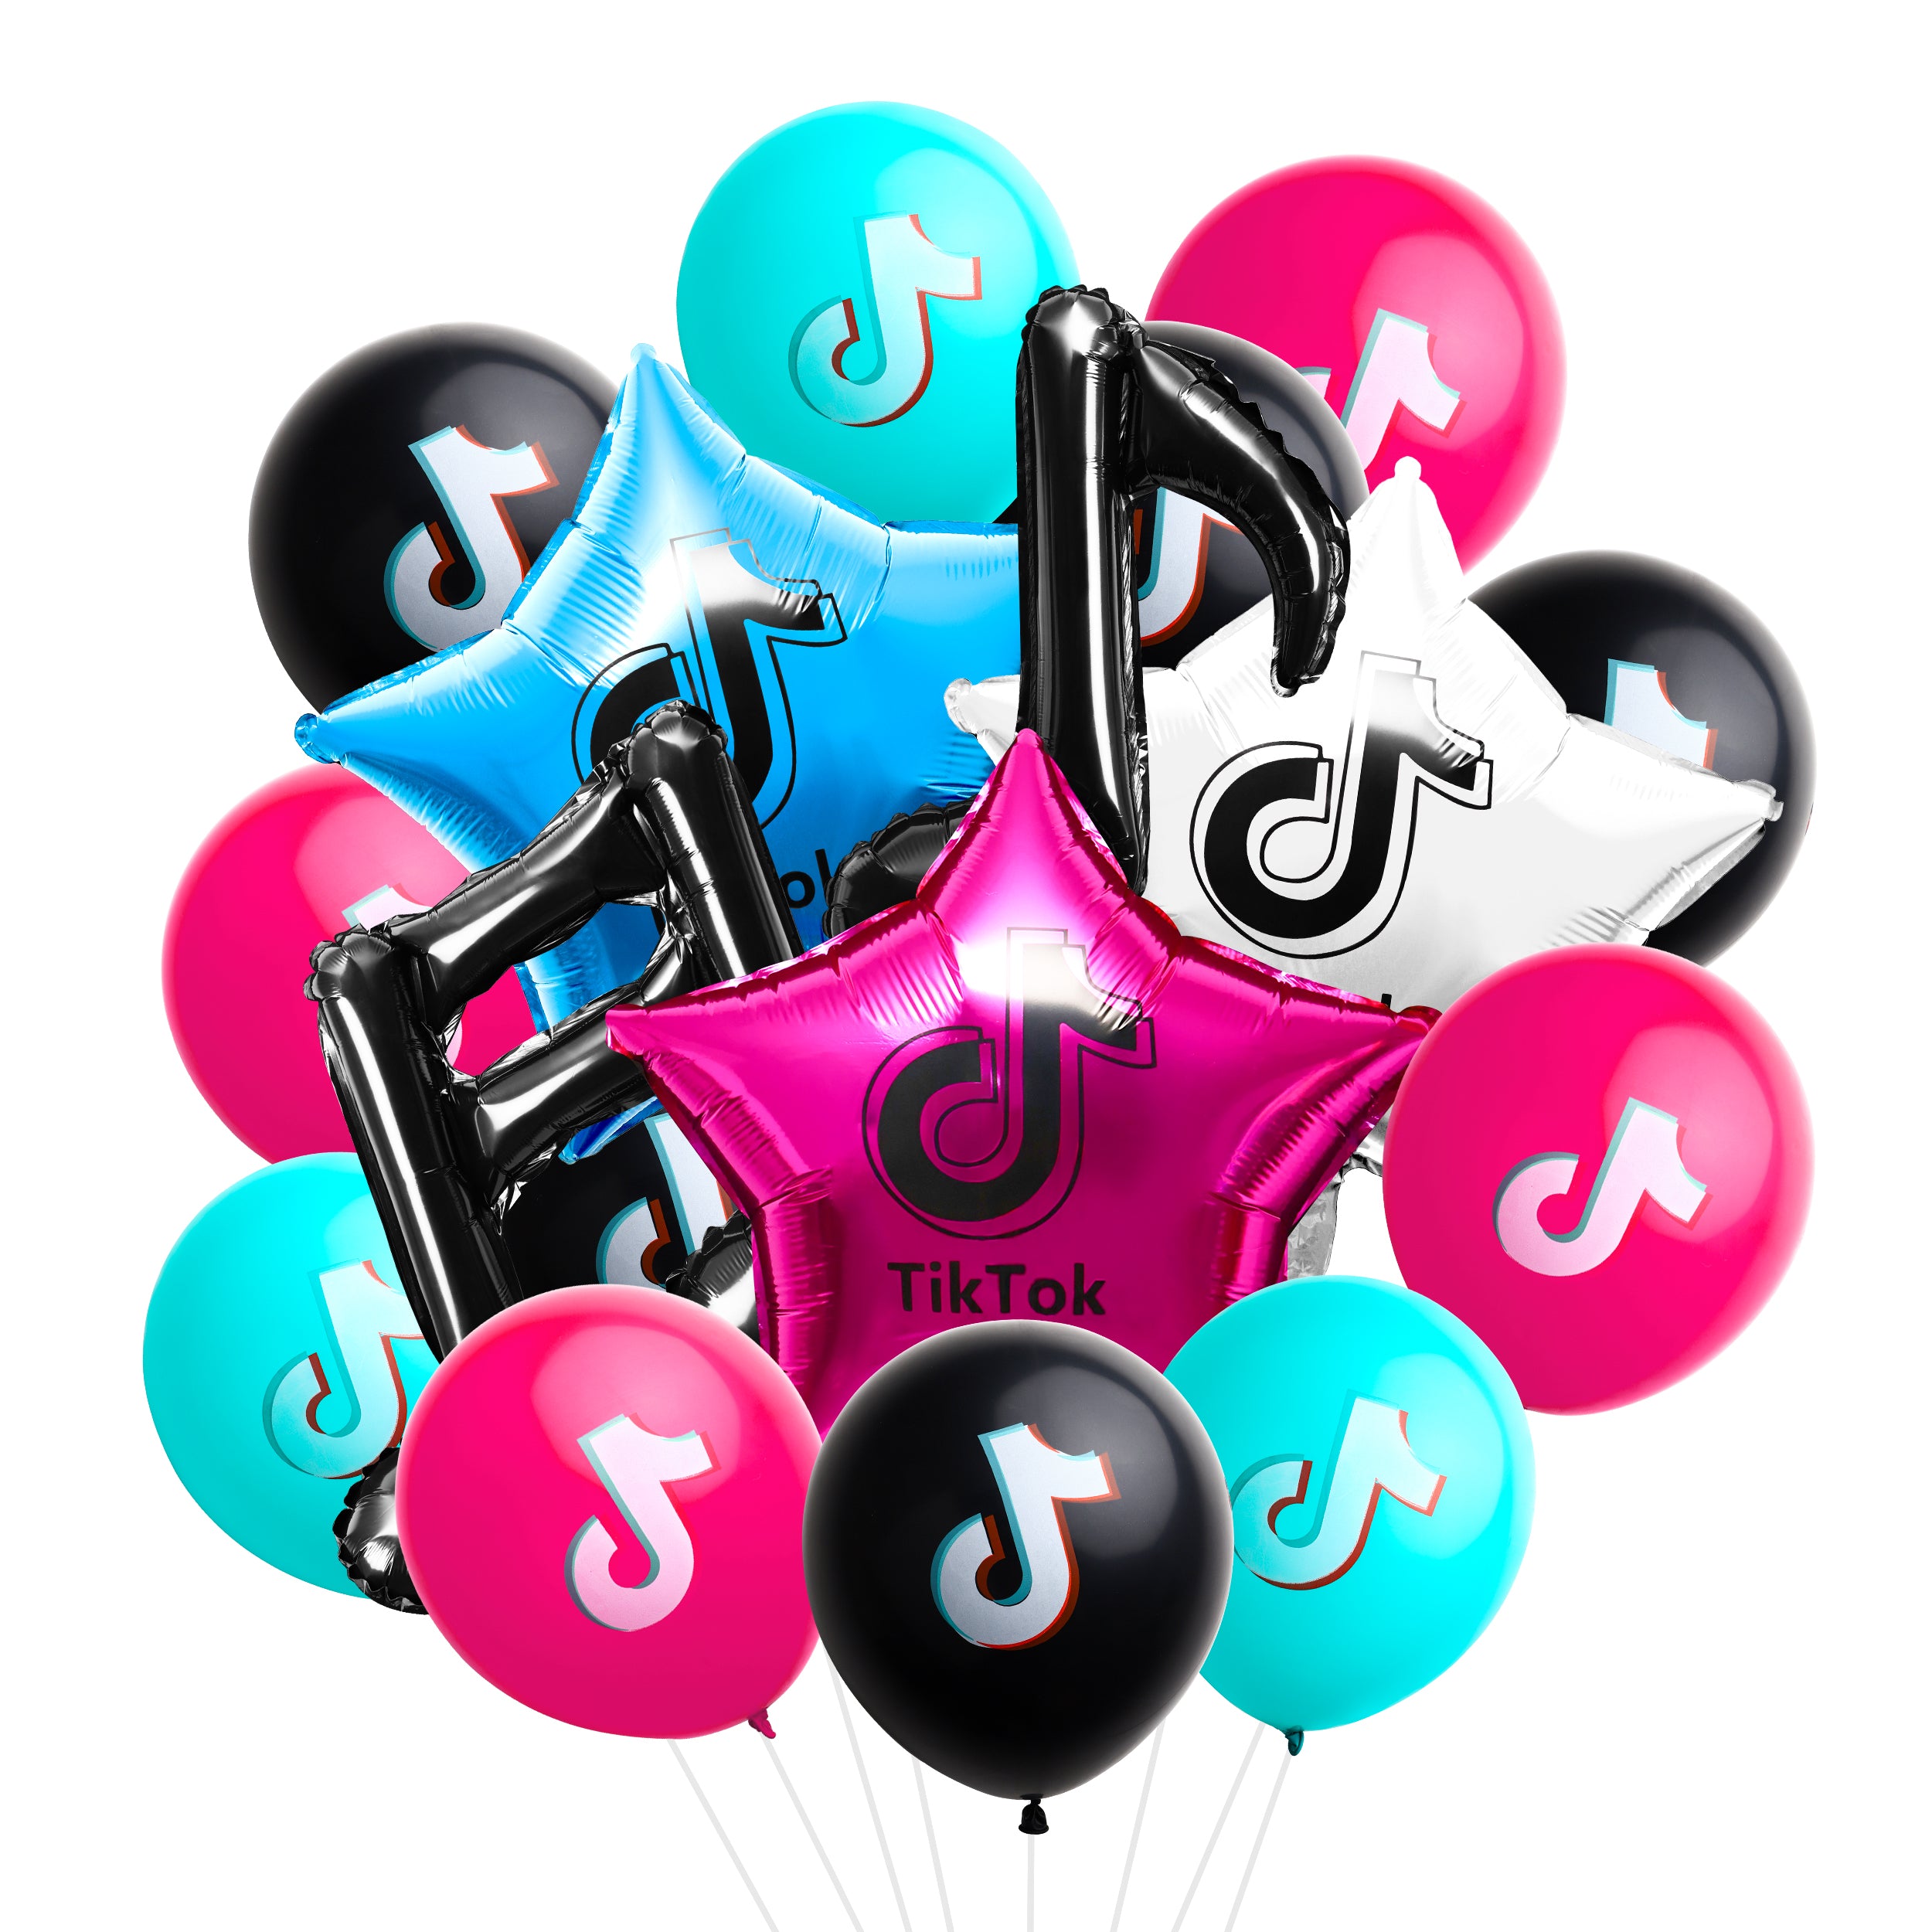 35Pcs Music Note Latex Balloons Aluminum Foil Balloon Kit, Musical Note Theme Birthday Party Decorations Musical DJ Short Video Party Supplies Wedding Anniversary Festival Decor